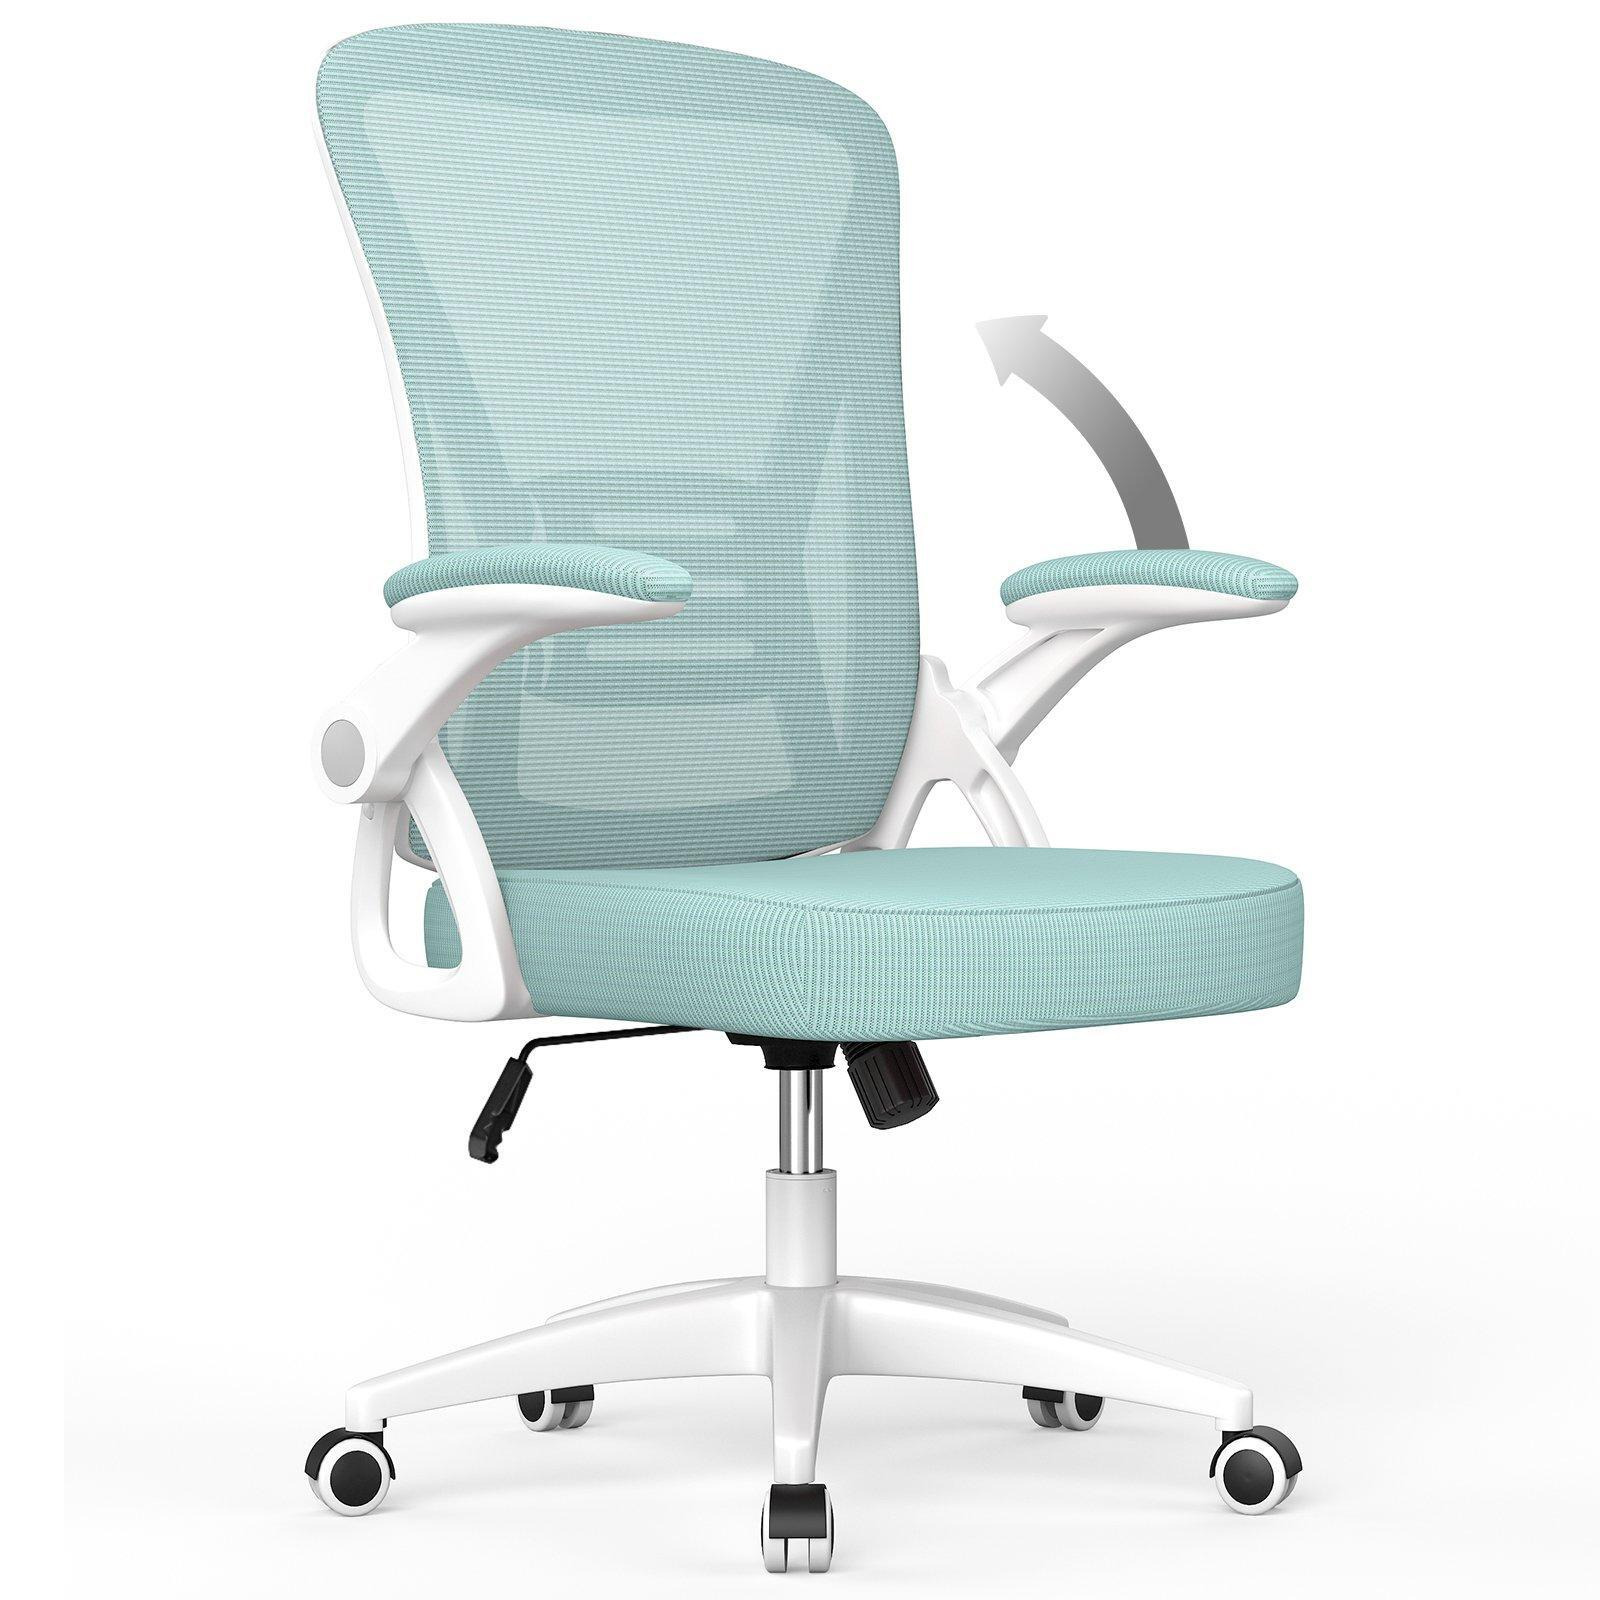 Office Chair with 360° Rotation Seat and Adjustable Armrests - image 1